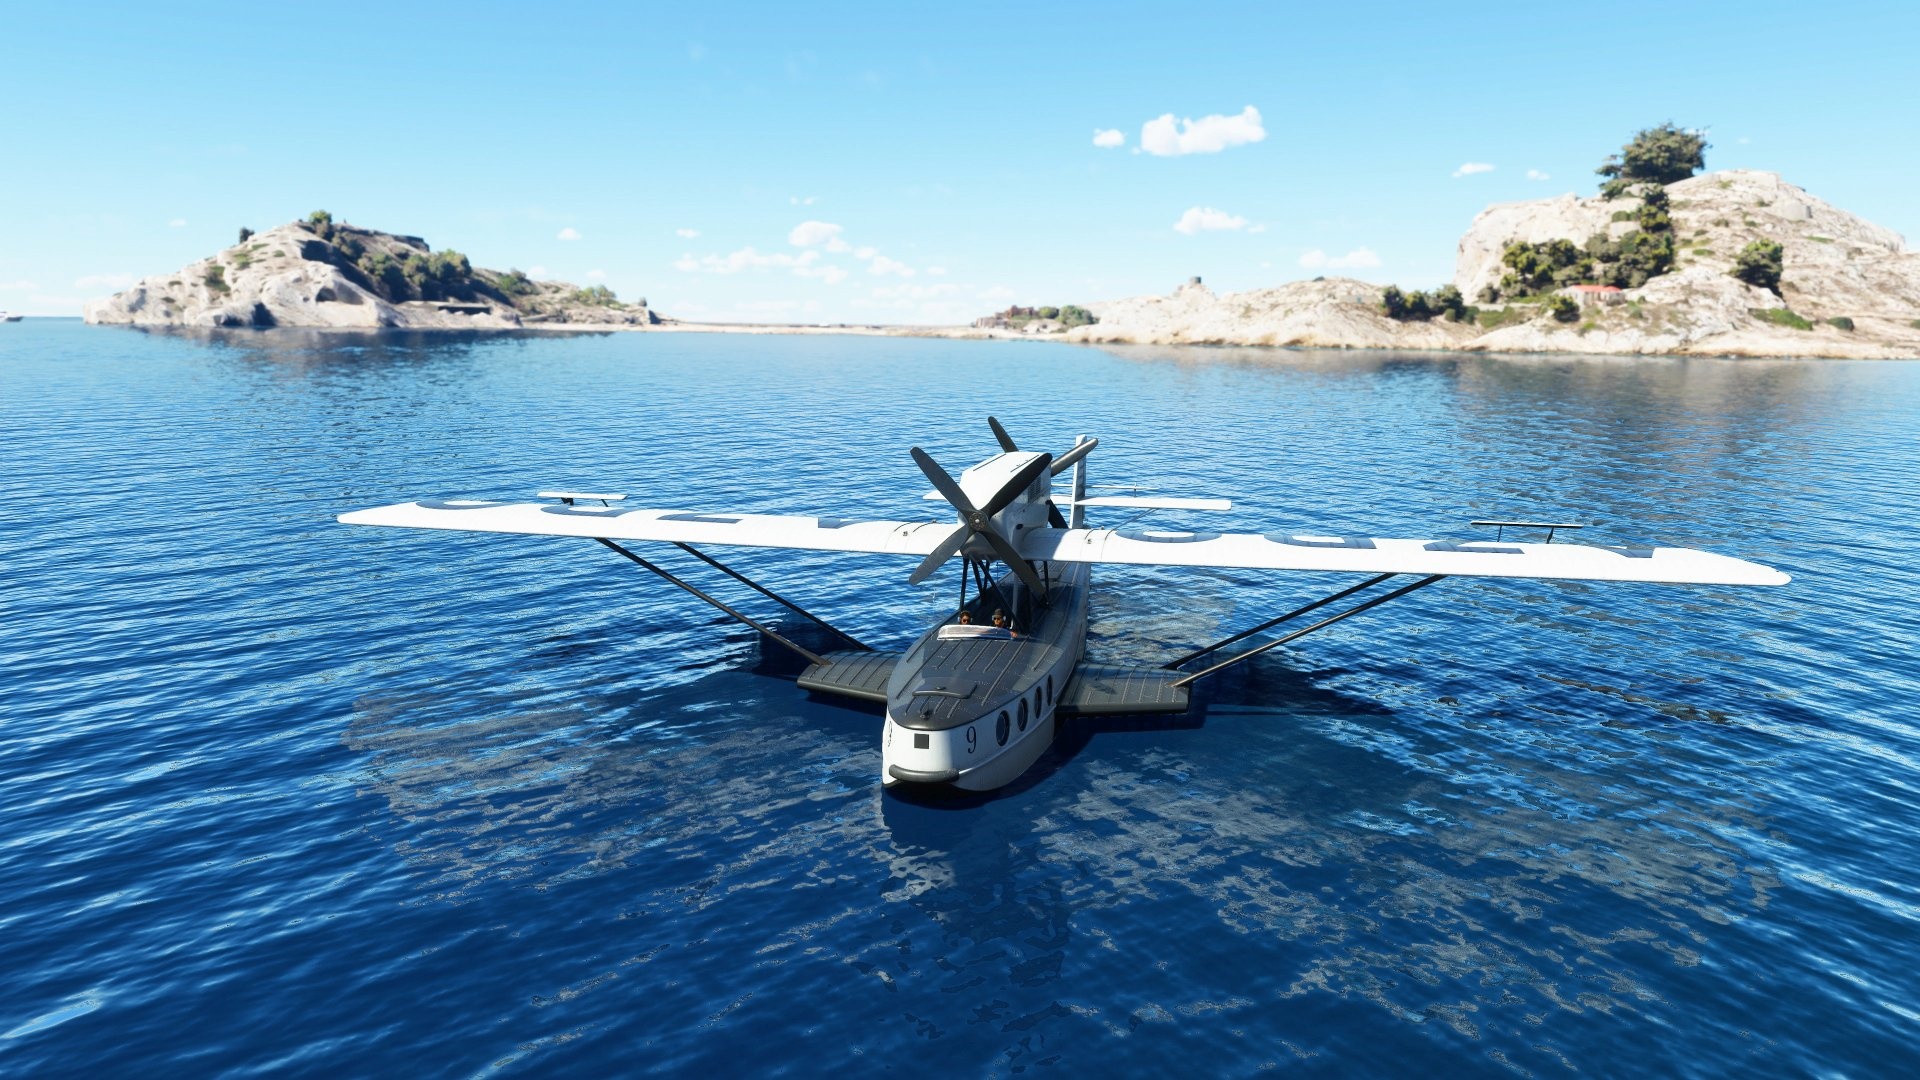 Dornier Do X Wallpaper posted by Ethan Anderson 1920x1080